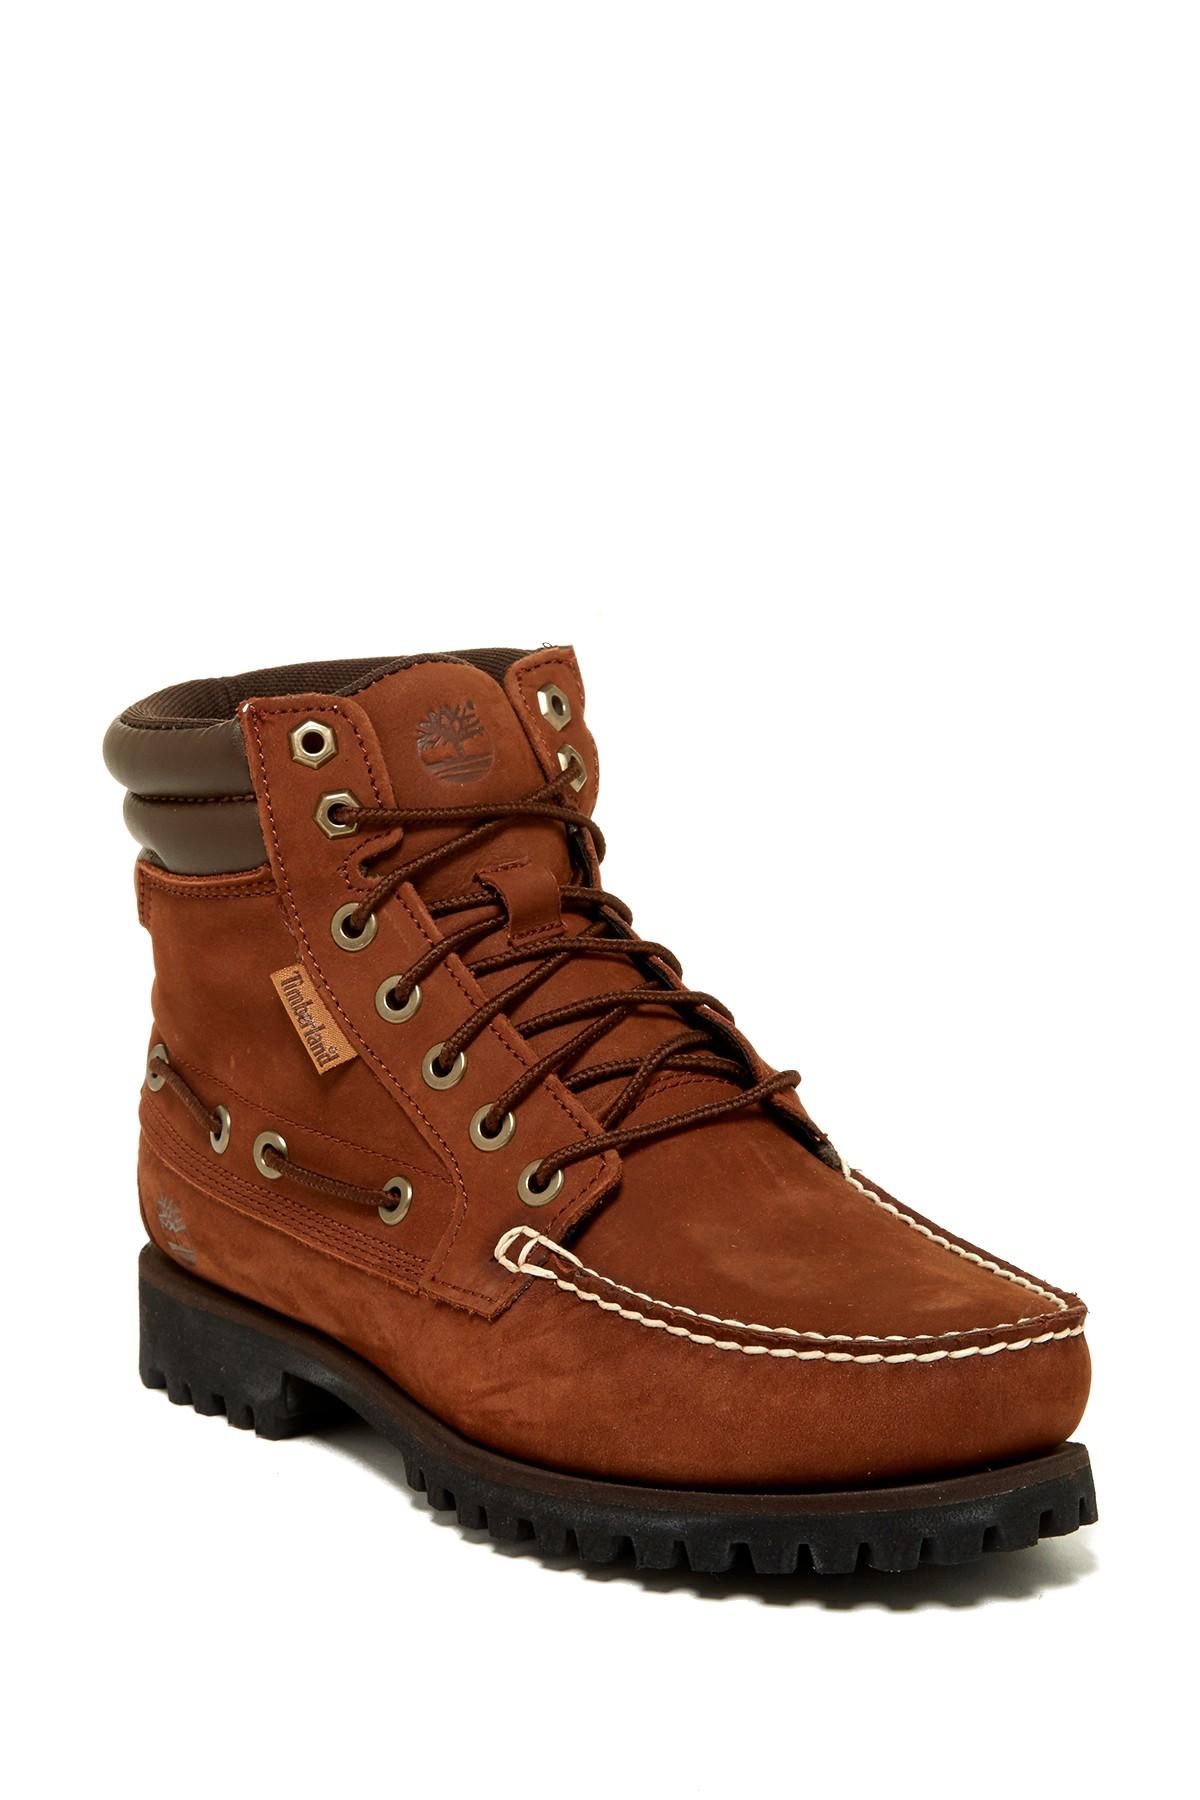 Timberland Leather 7 Eye Moc Toe Oakwell Lace-up Boot in Brown for Men ...